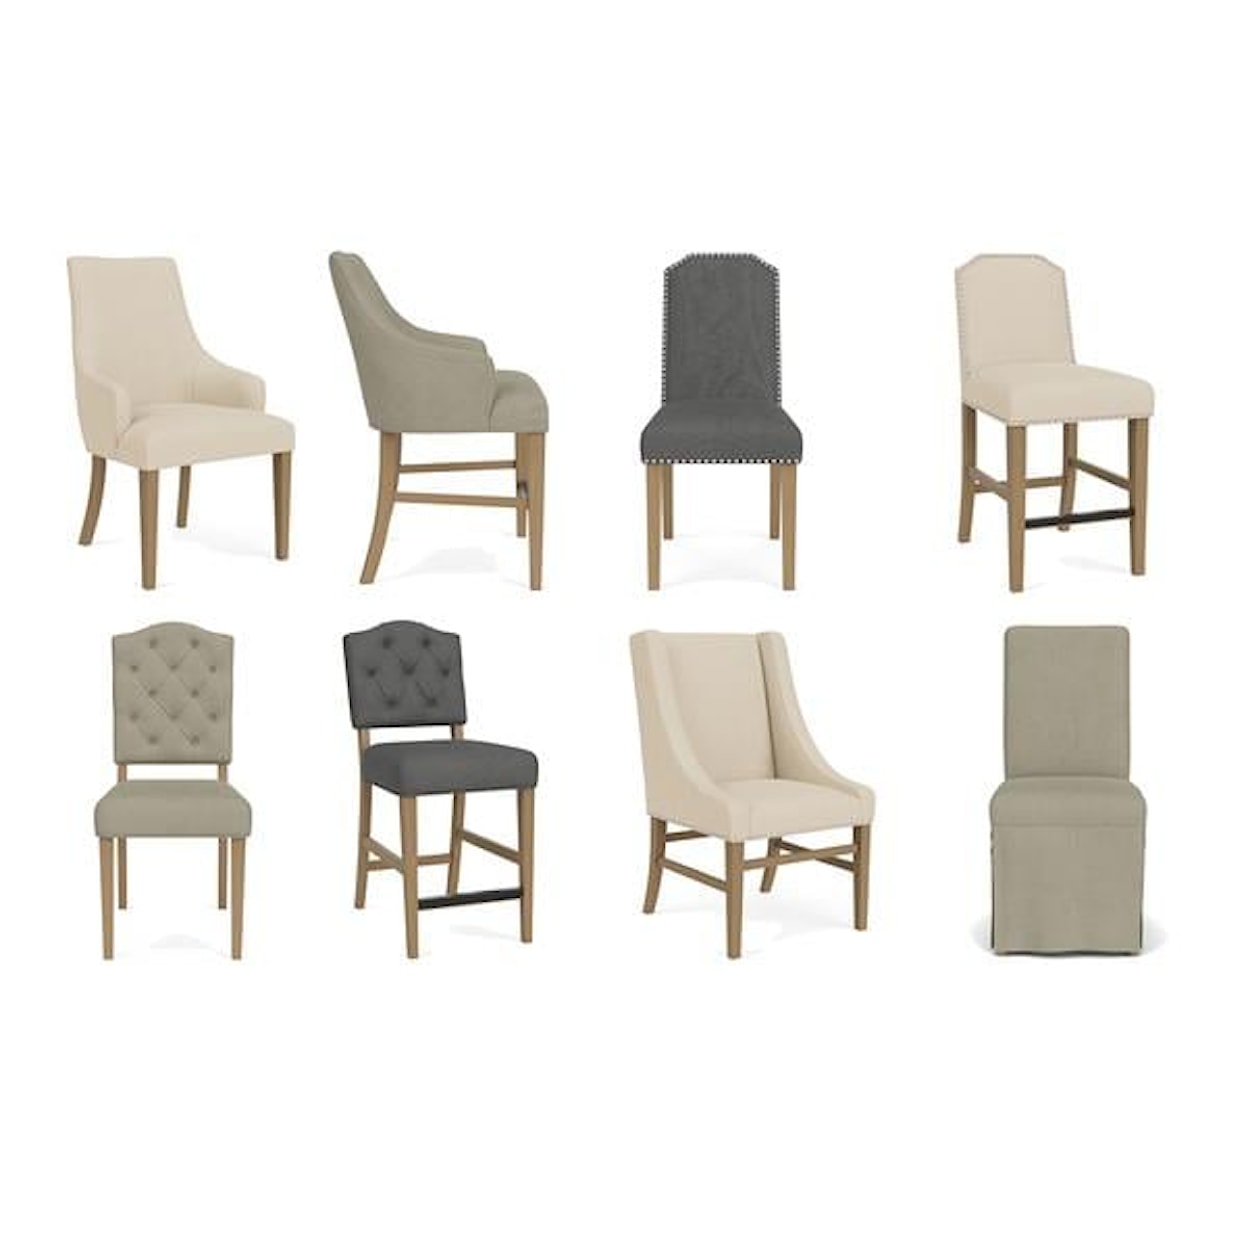 Riverside Furniture Mix-N-Match Chairs Upholstered Host Chair